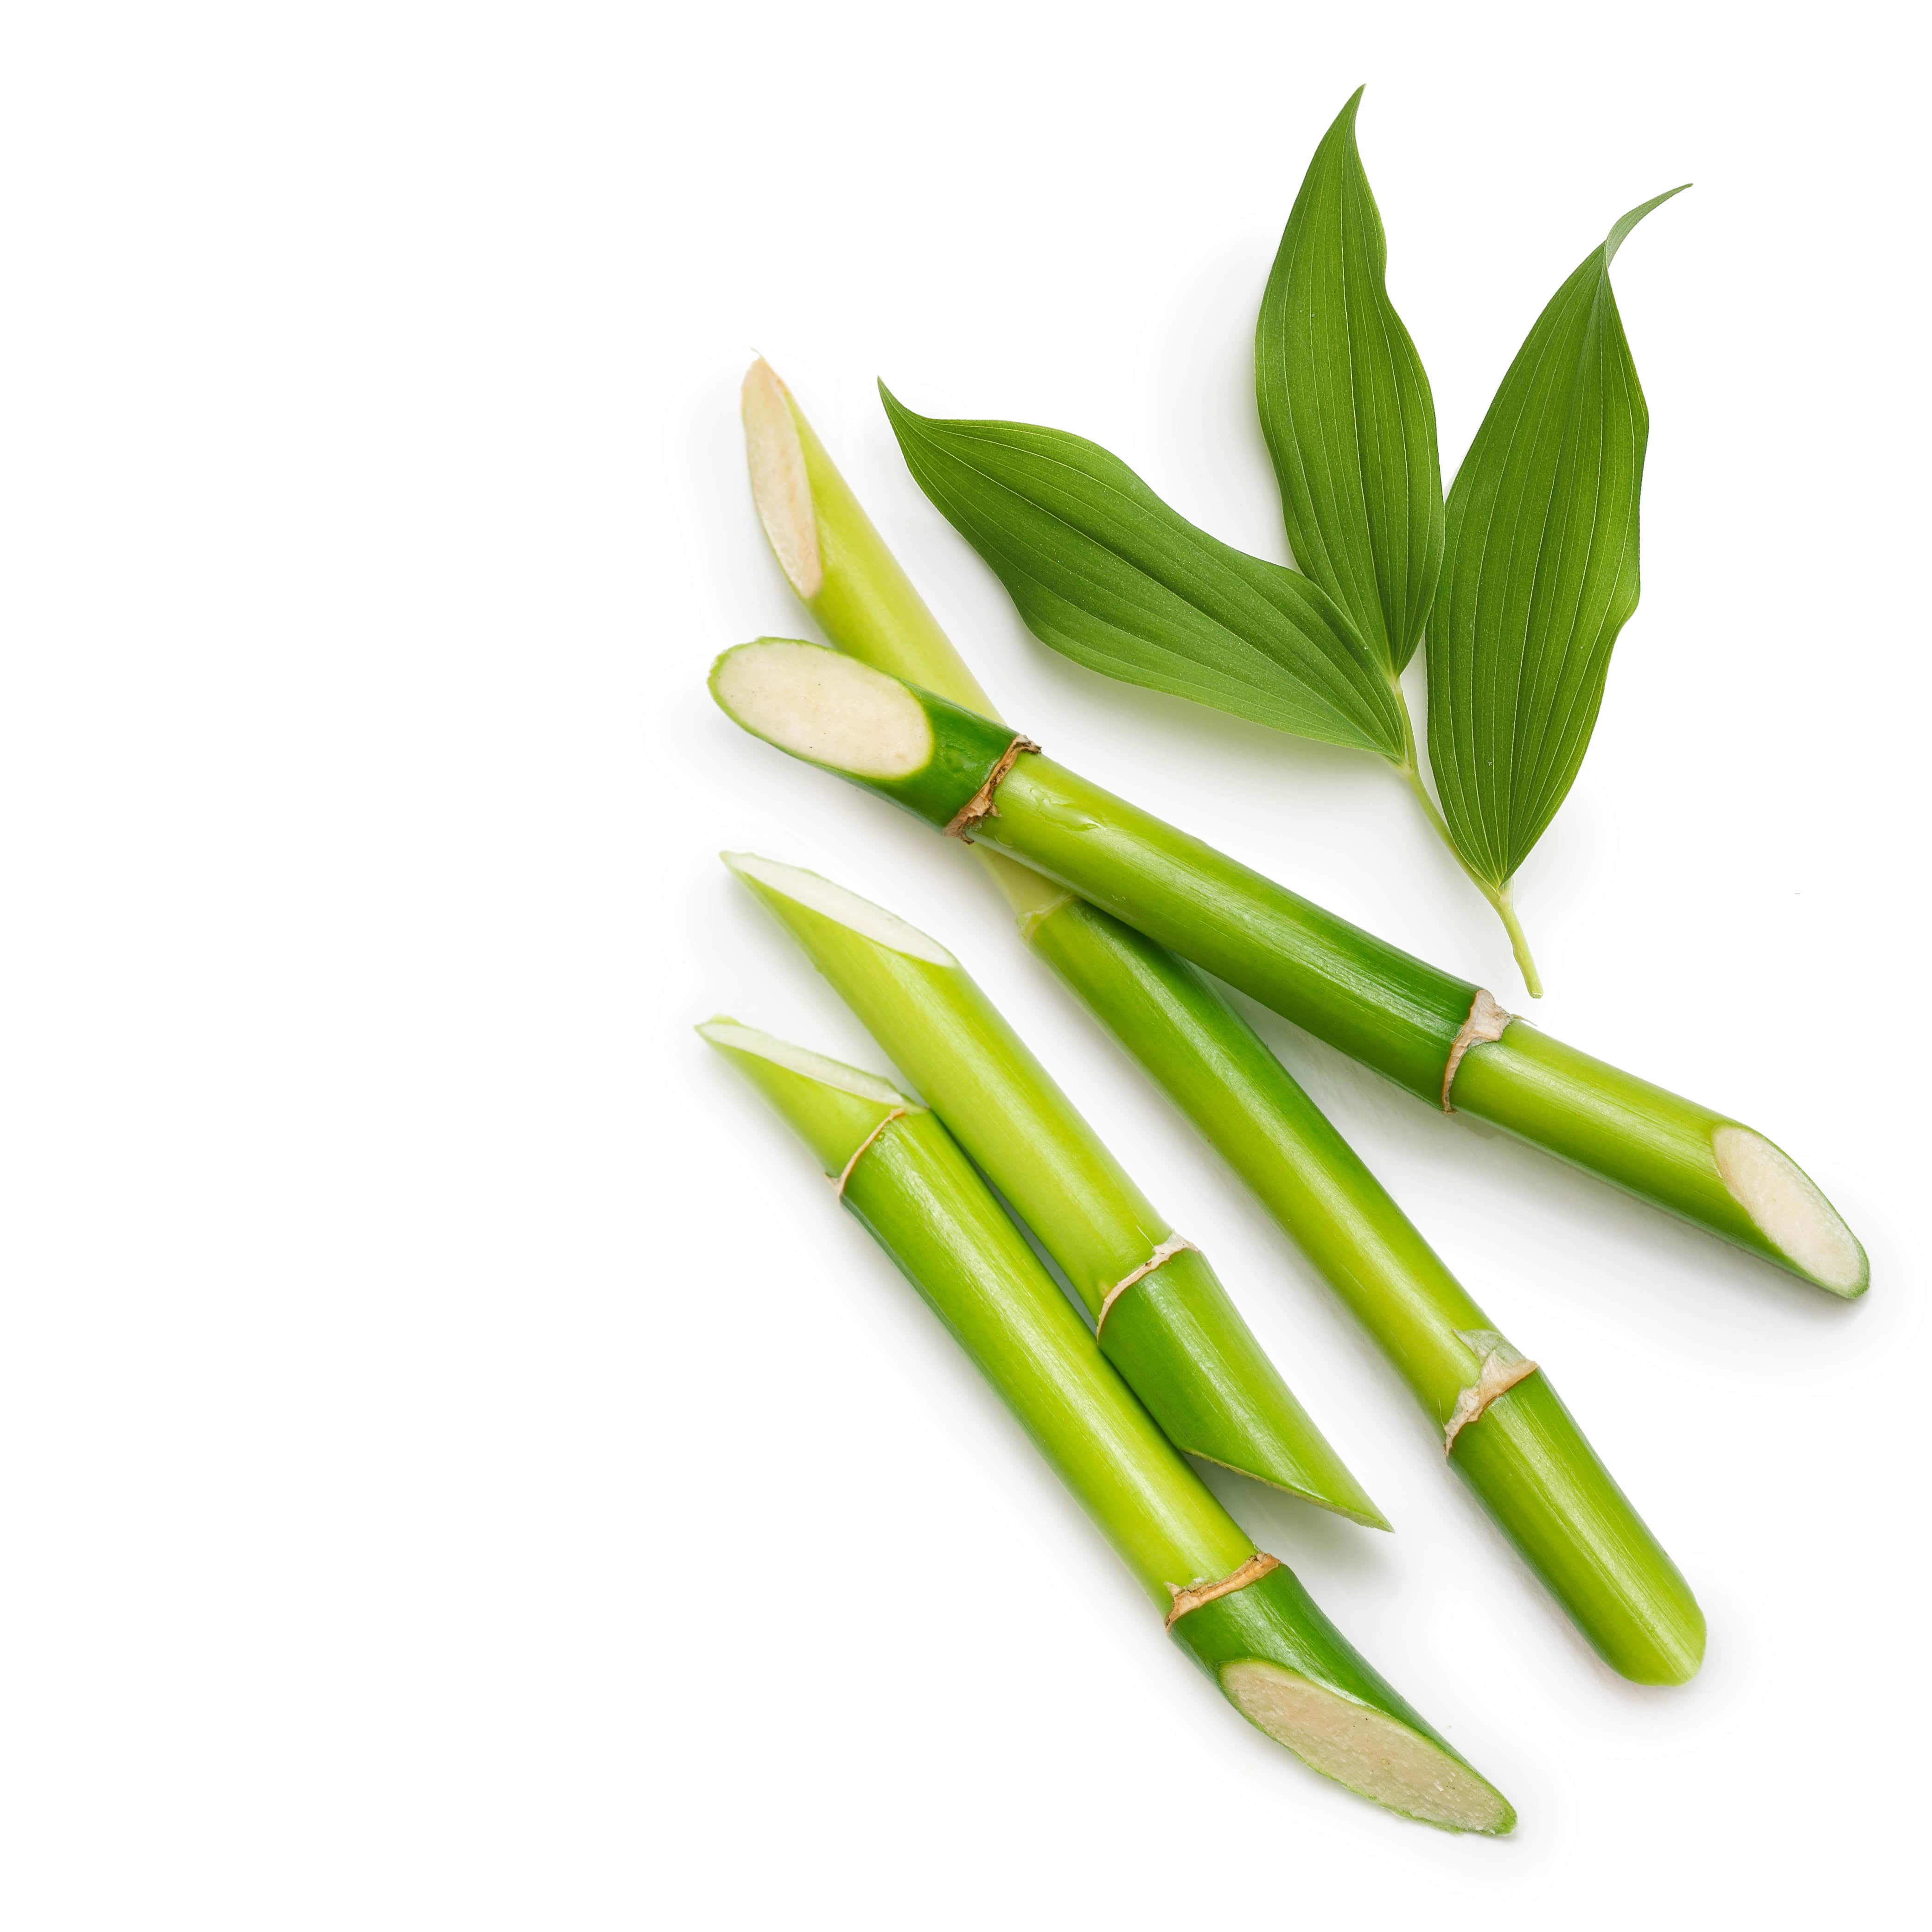 Bamboo Garden Fragrance Oil for Cold Air Diffusers